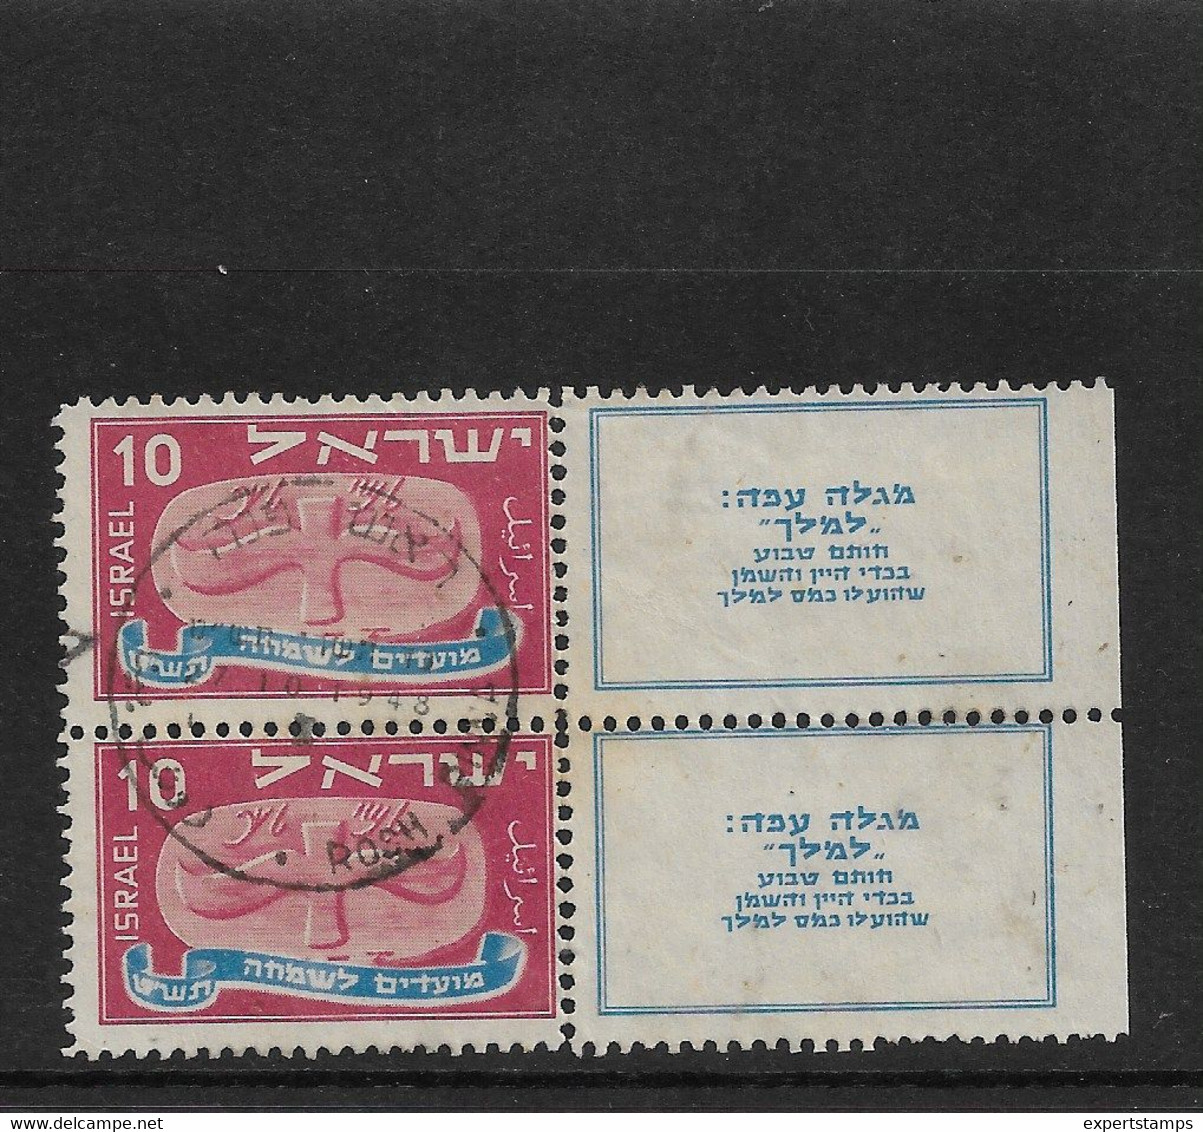 PM94/ Israel 1948 2 Stamps With Tabs Cancellation, Rosh Pinna - Usati (con Tab)